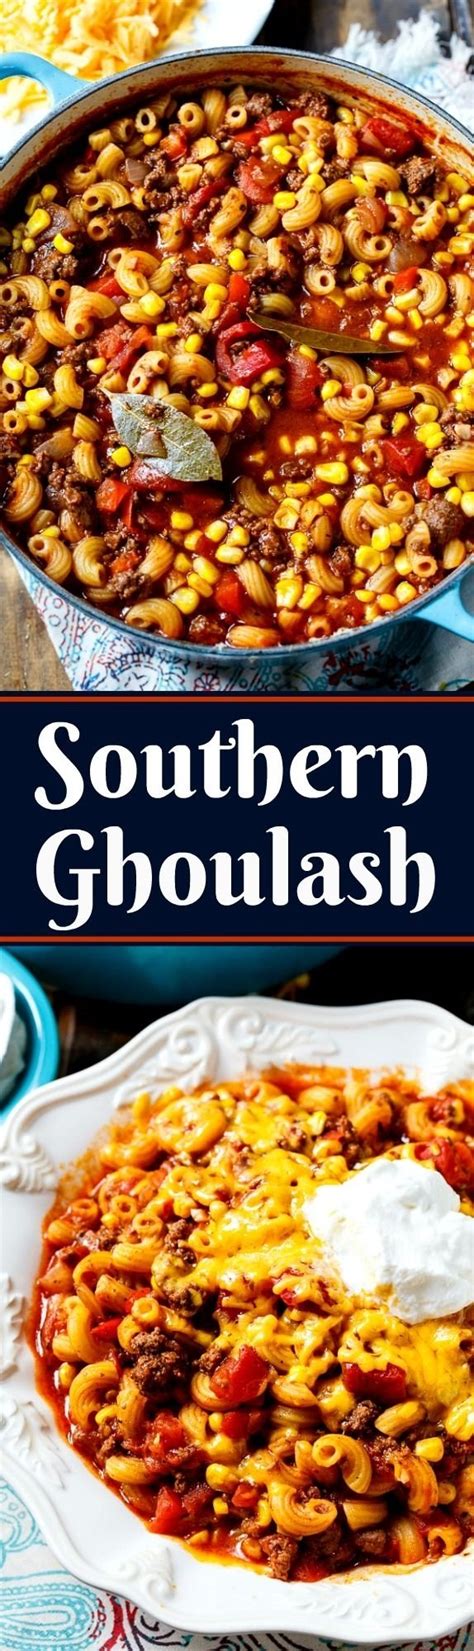 Soul food is an ethnic cuisine traditionally prepared and eaten by african americans, originating in the southern united states. 10 Best Quick Soul Food Dinner Ideas 2020